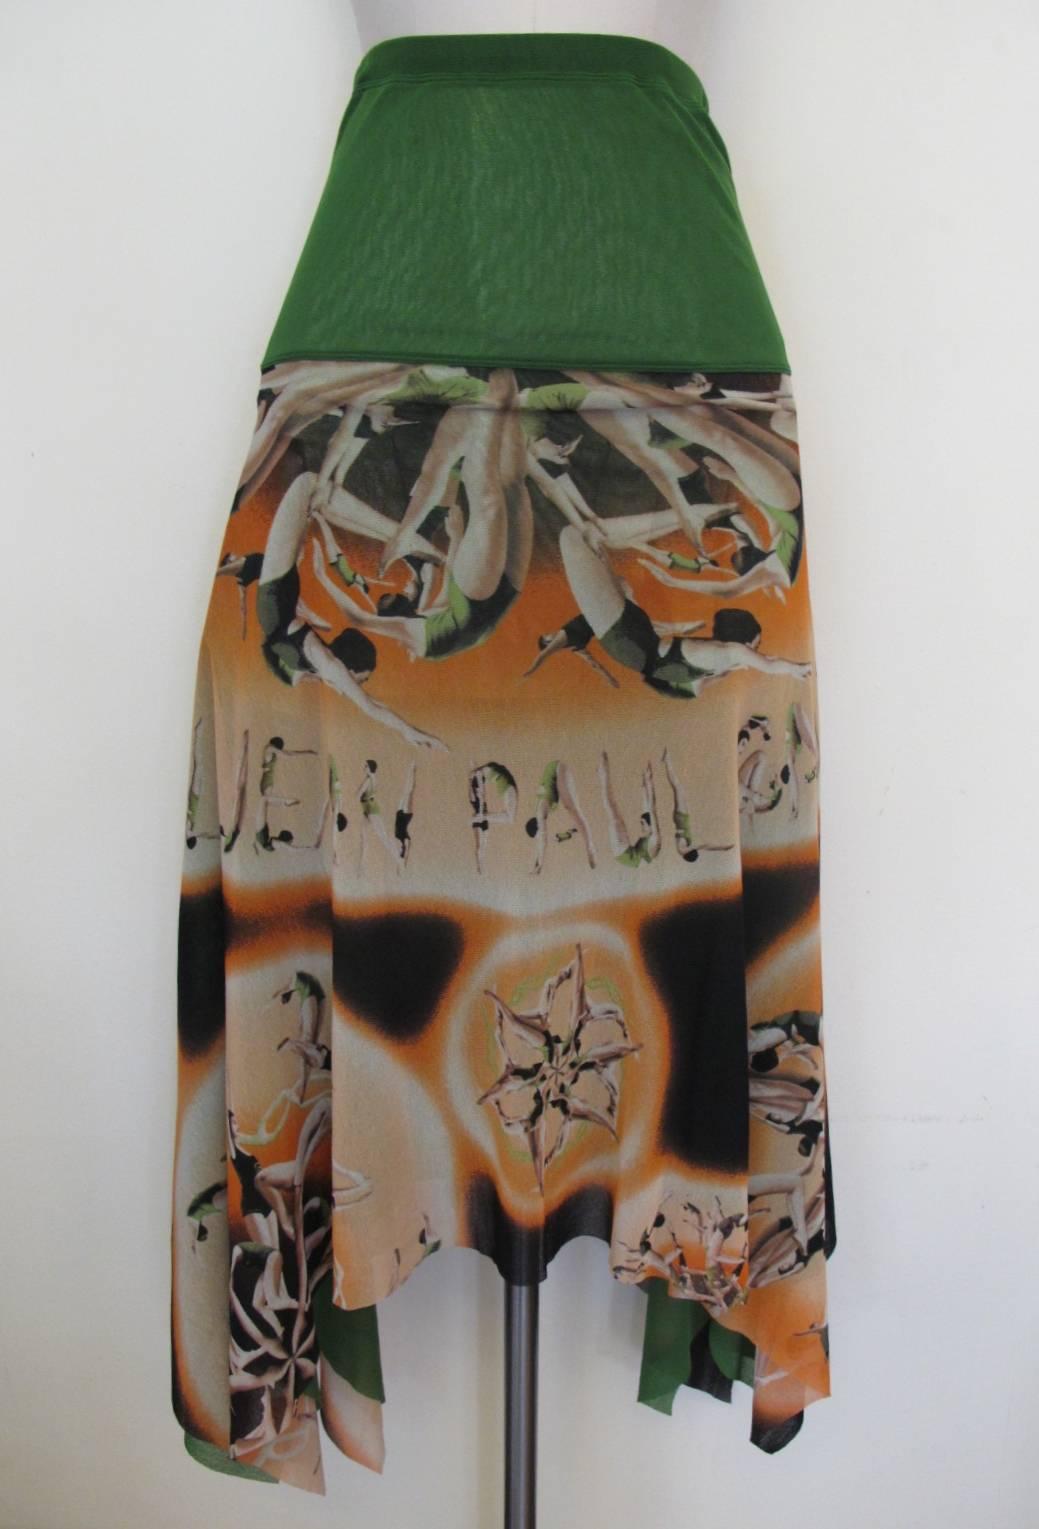 Fabulous strapless dress or skirt with women acrobatic design by Jean Paul Gaultier - Soleil. The skirt is cut on the bias with a fabulous asymmetrical skirt. The color scheme is kelly green, orange and dark chocolate brown. Fabric is super -